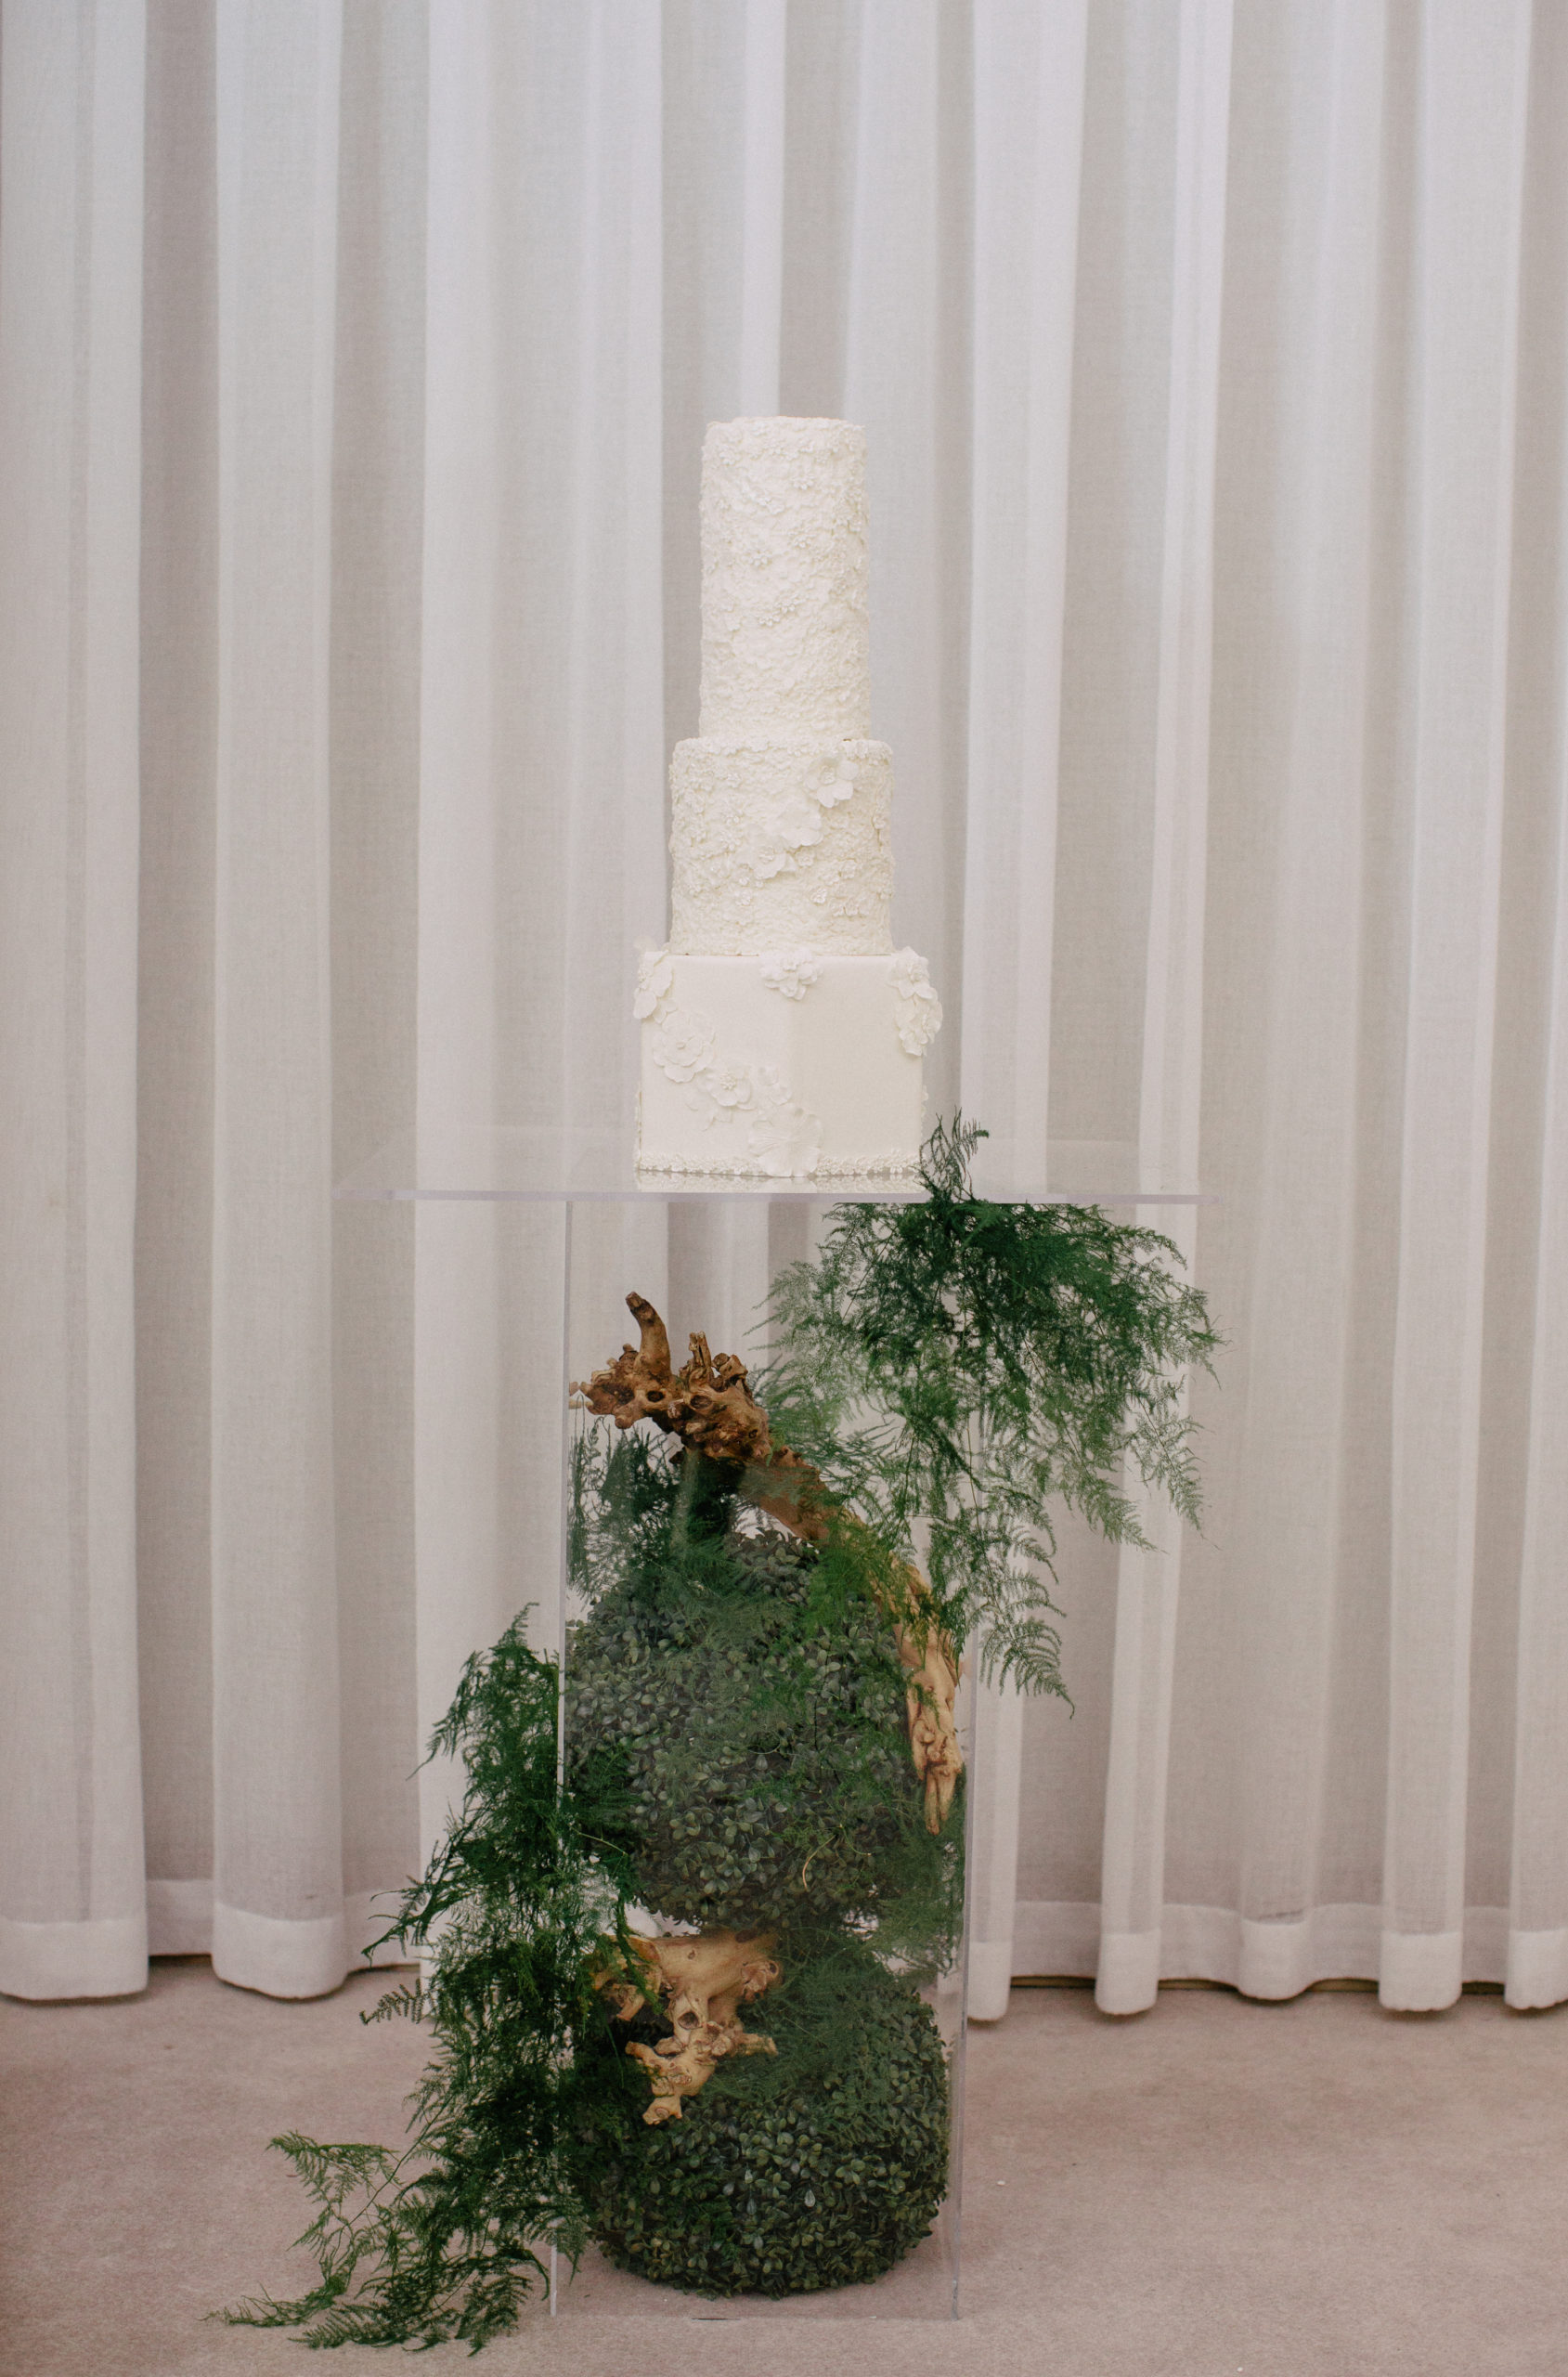 A terrarium cake stand and greenery compliments the Sweet Guilt by Angelica fondant wedding cake